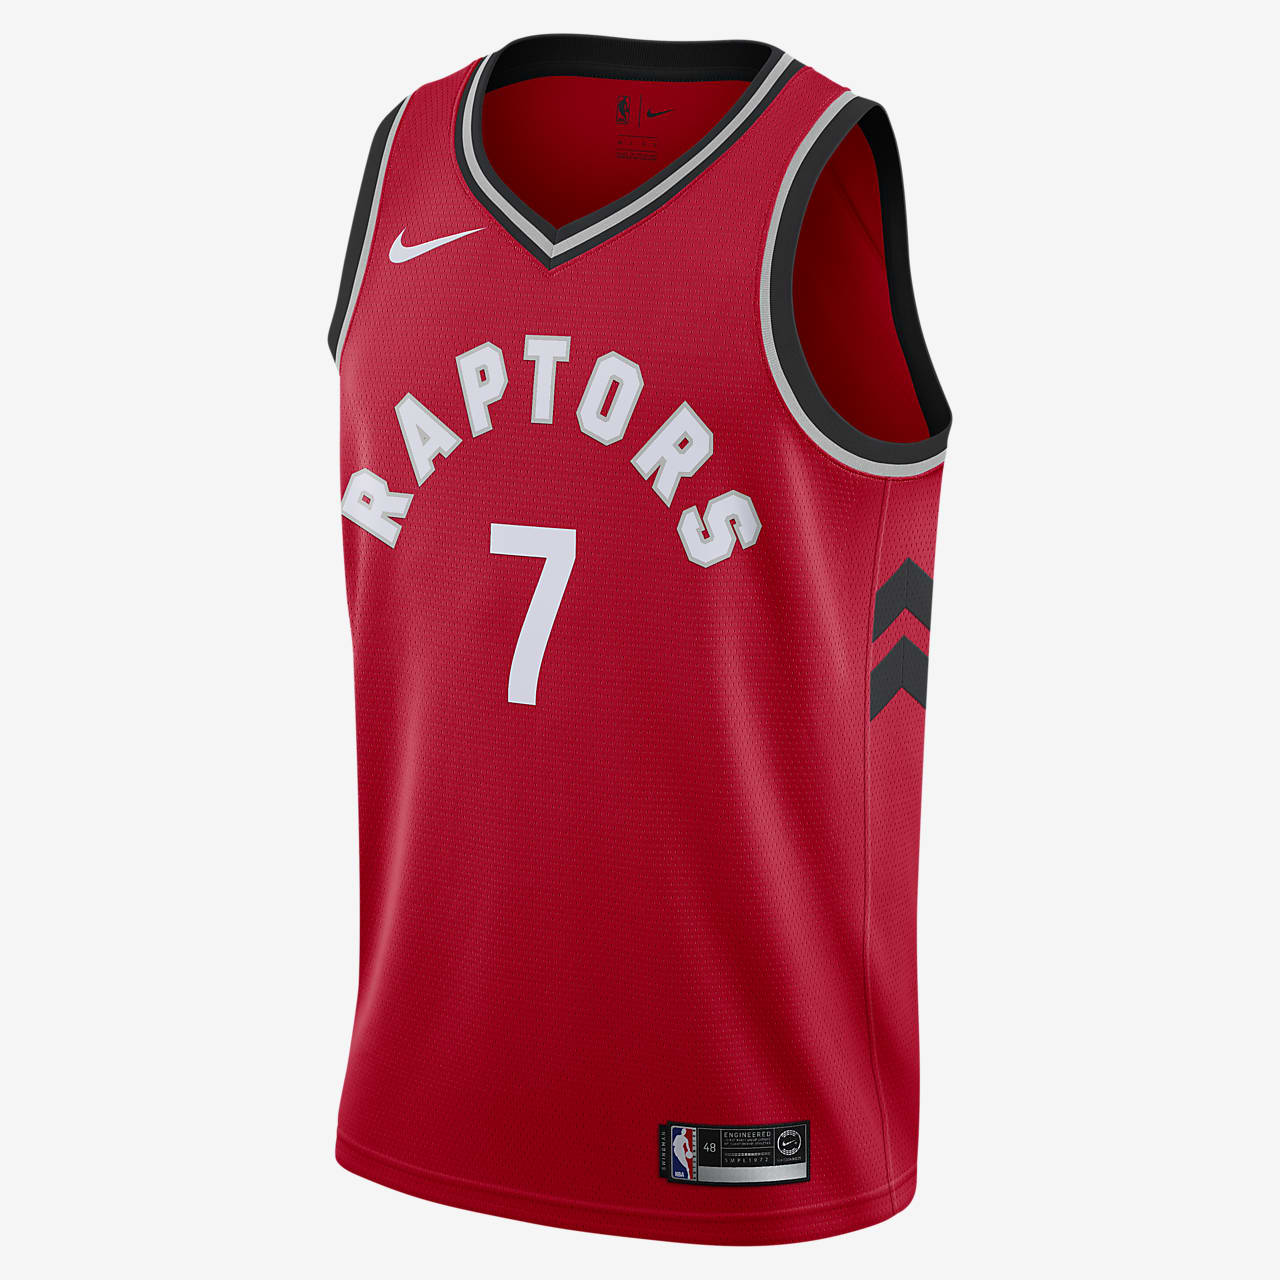 where can i buy a raptors jersey